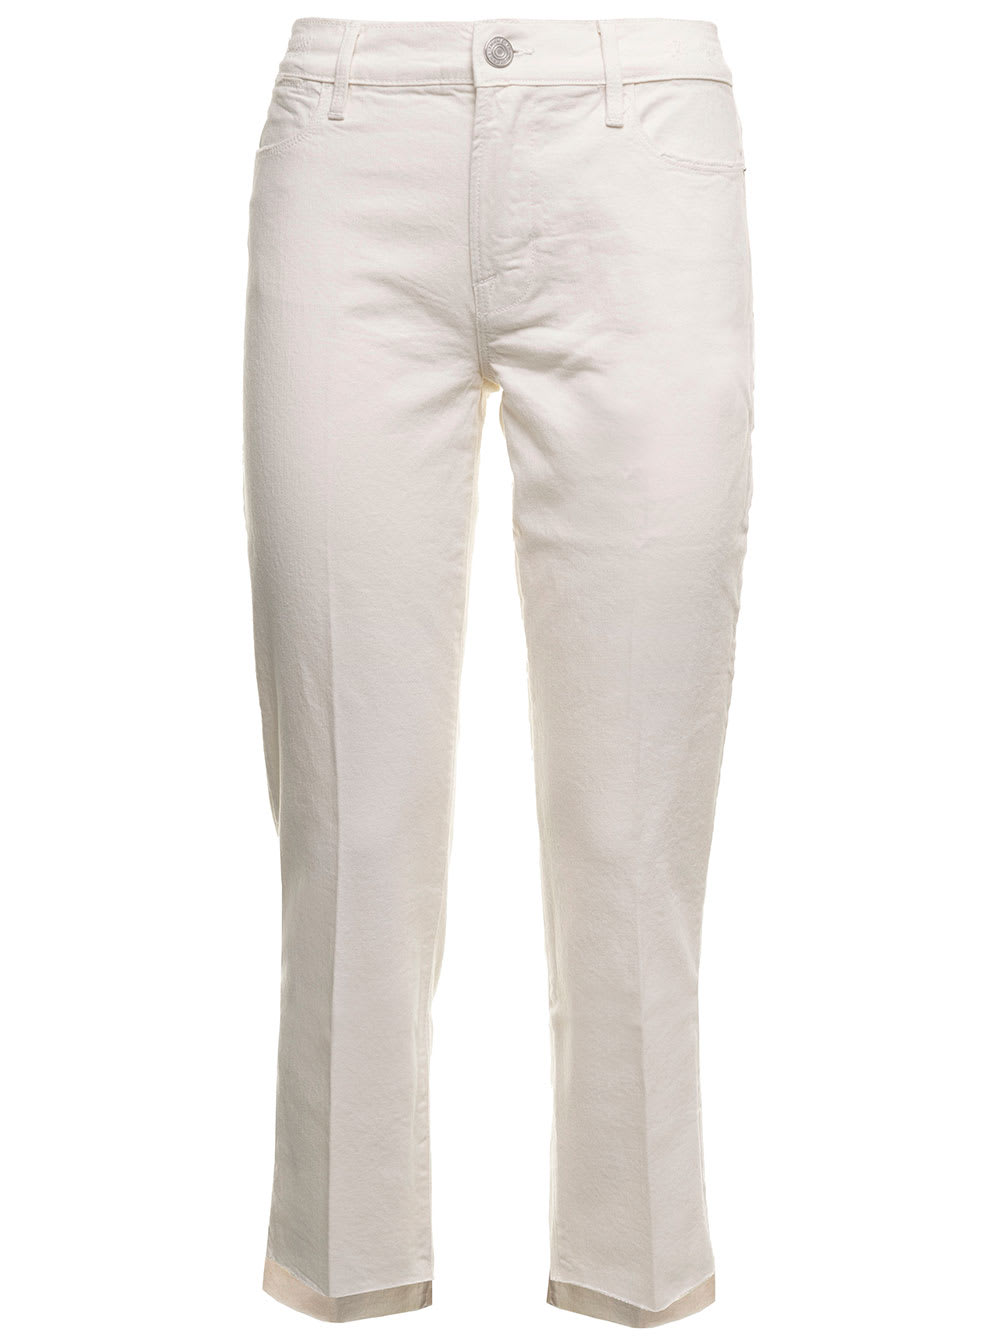 Le High Straight Ivory Colored Denim Jeans Frame Woman